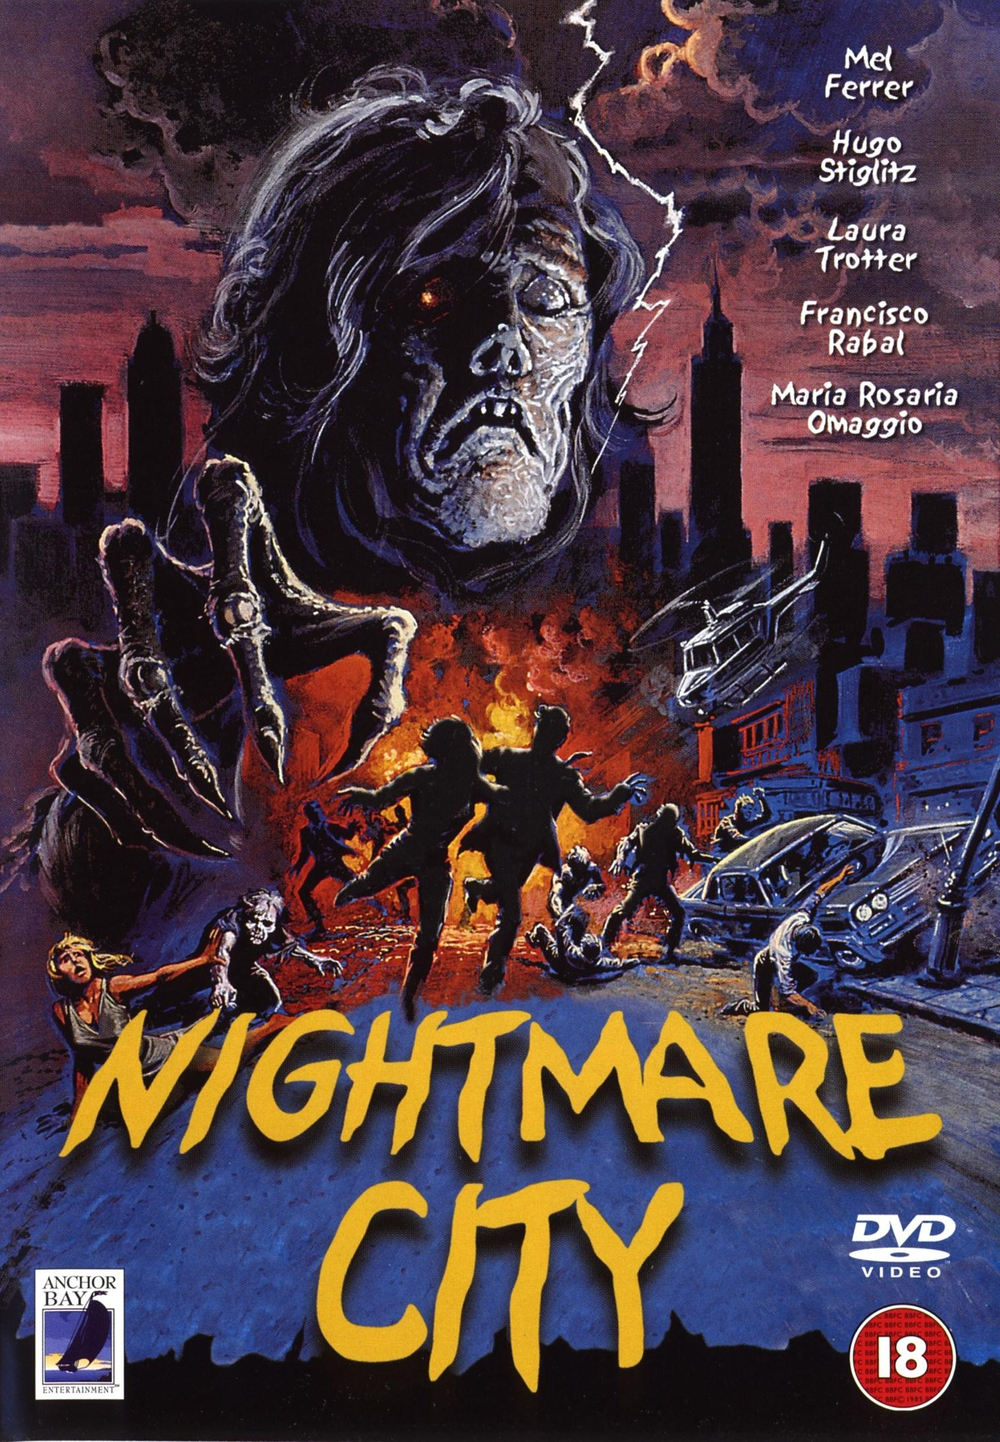 the-greatest-80s-zombie-film-youve-never-seen-nightmare-city.jpg